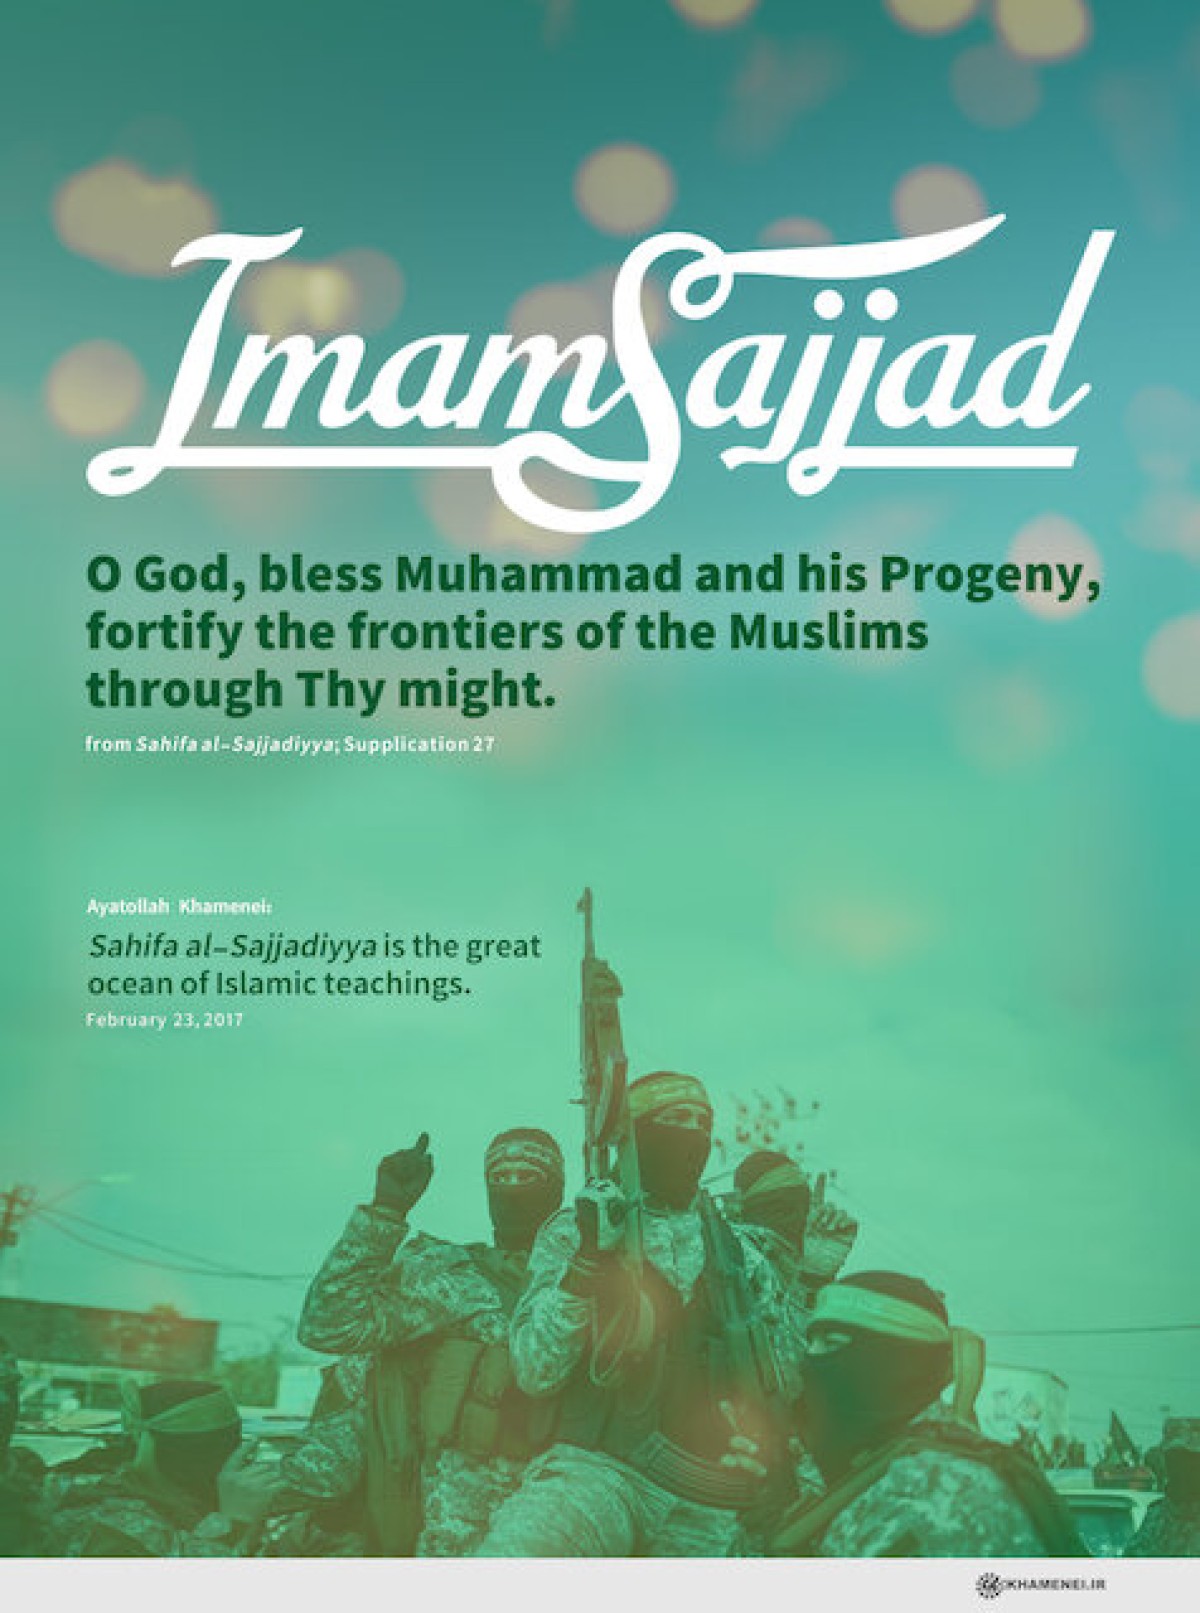 Imam Sajjad (pbuh): O God, bless Muhammad and his Progeny, fortify the frontiers of the Muslims through Thy might.